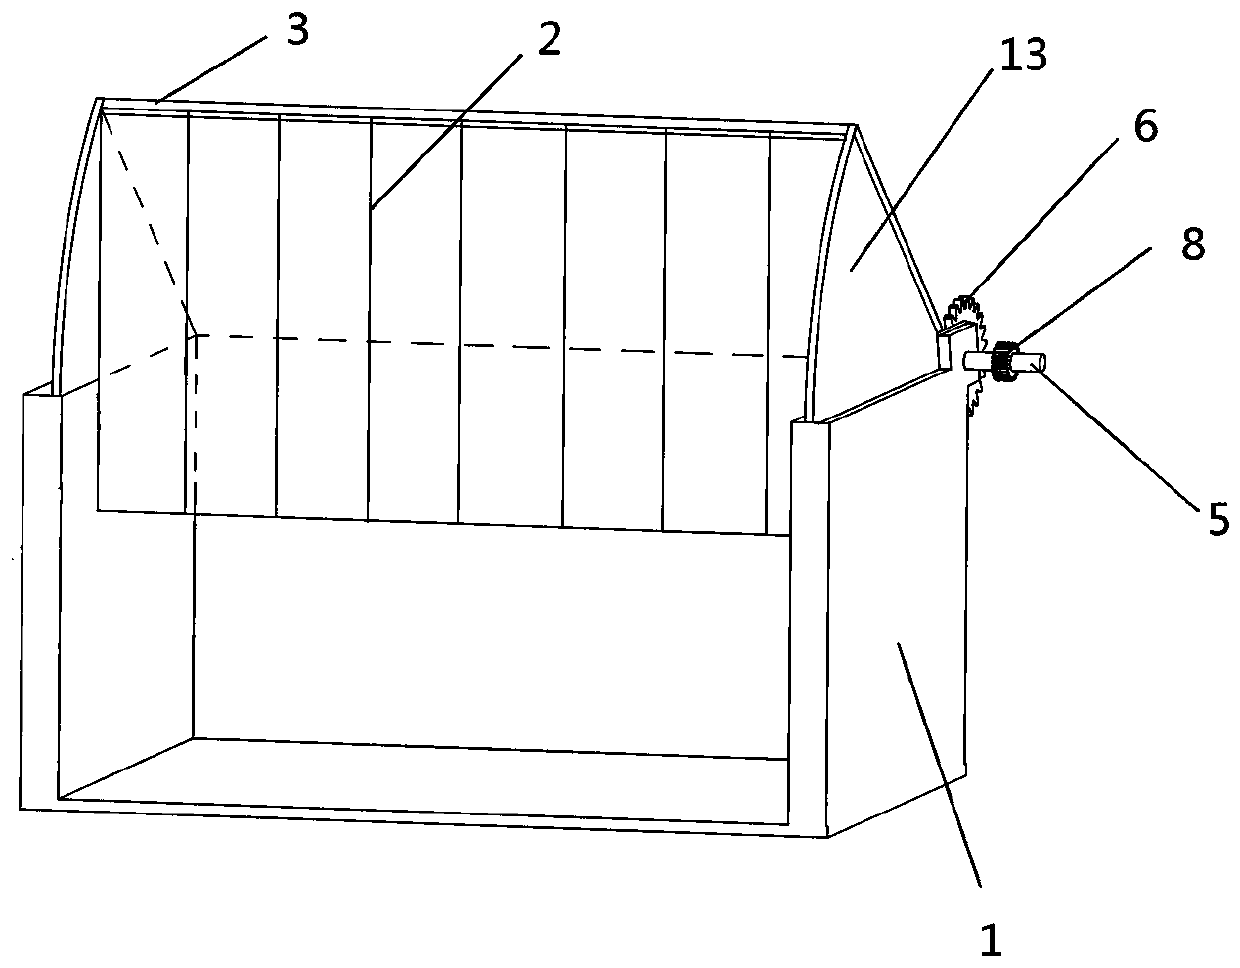 Pighouse temperature control method and system based on visual behavior feedback